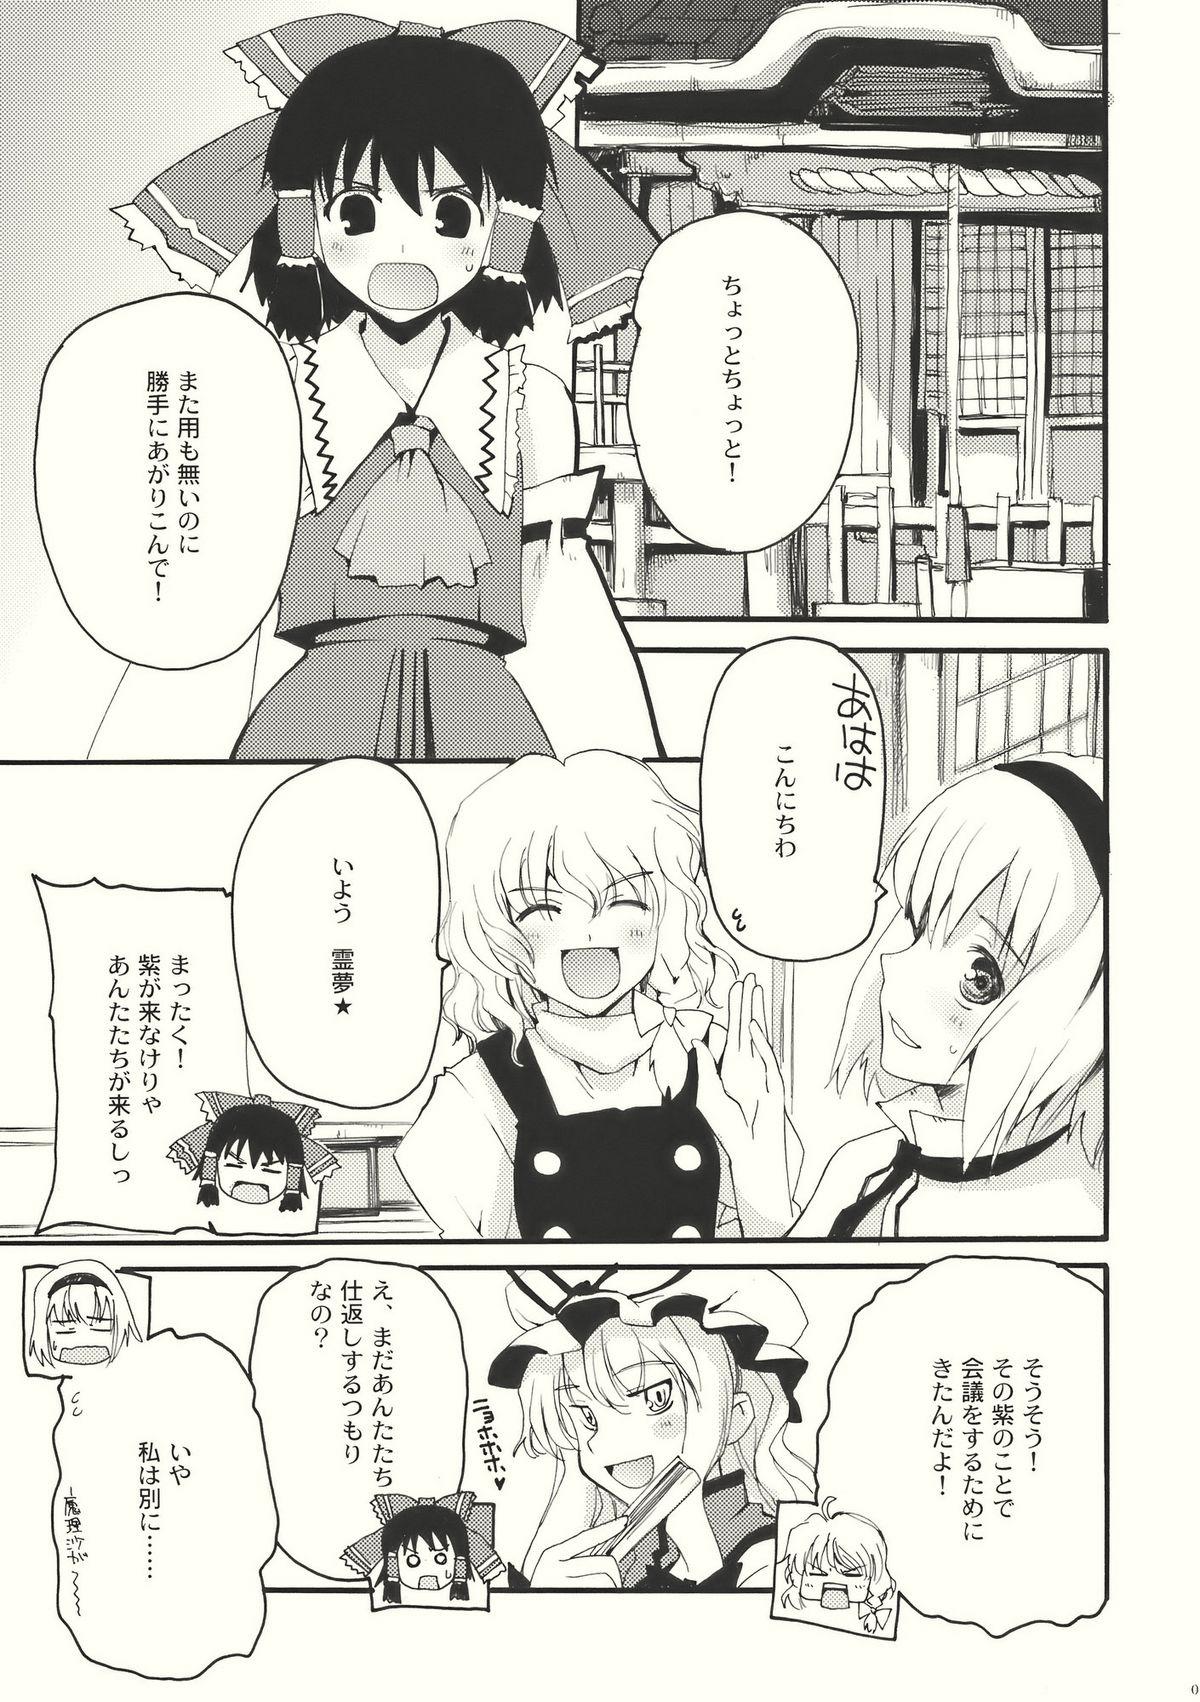 Classroom Let Me Take You Home Tonight! 2 - Touhou project Office - Page 5